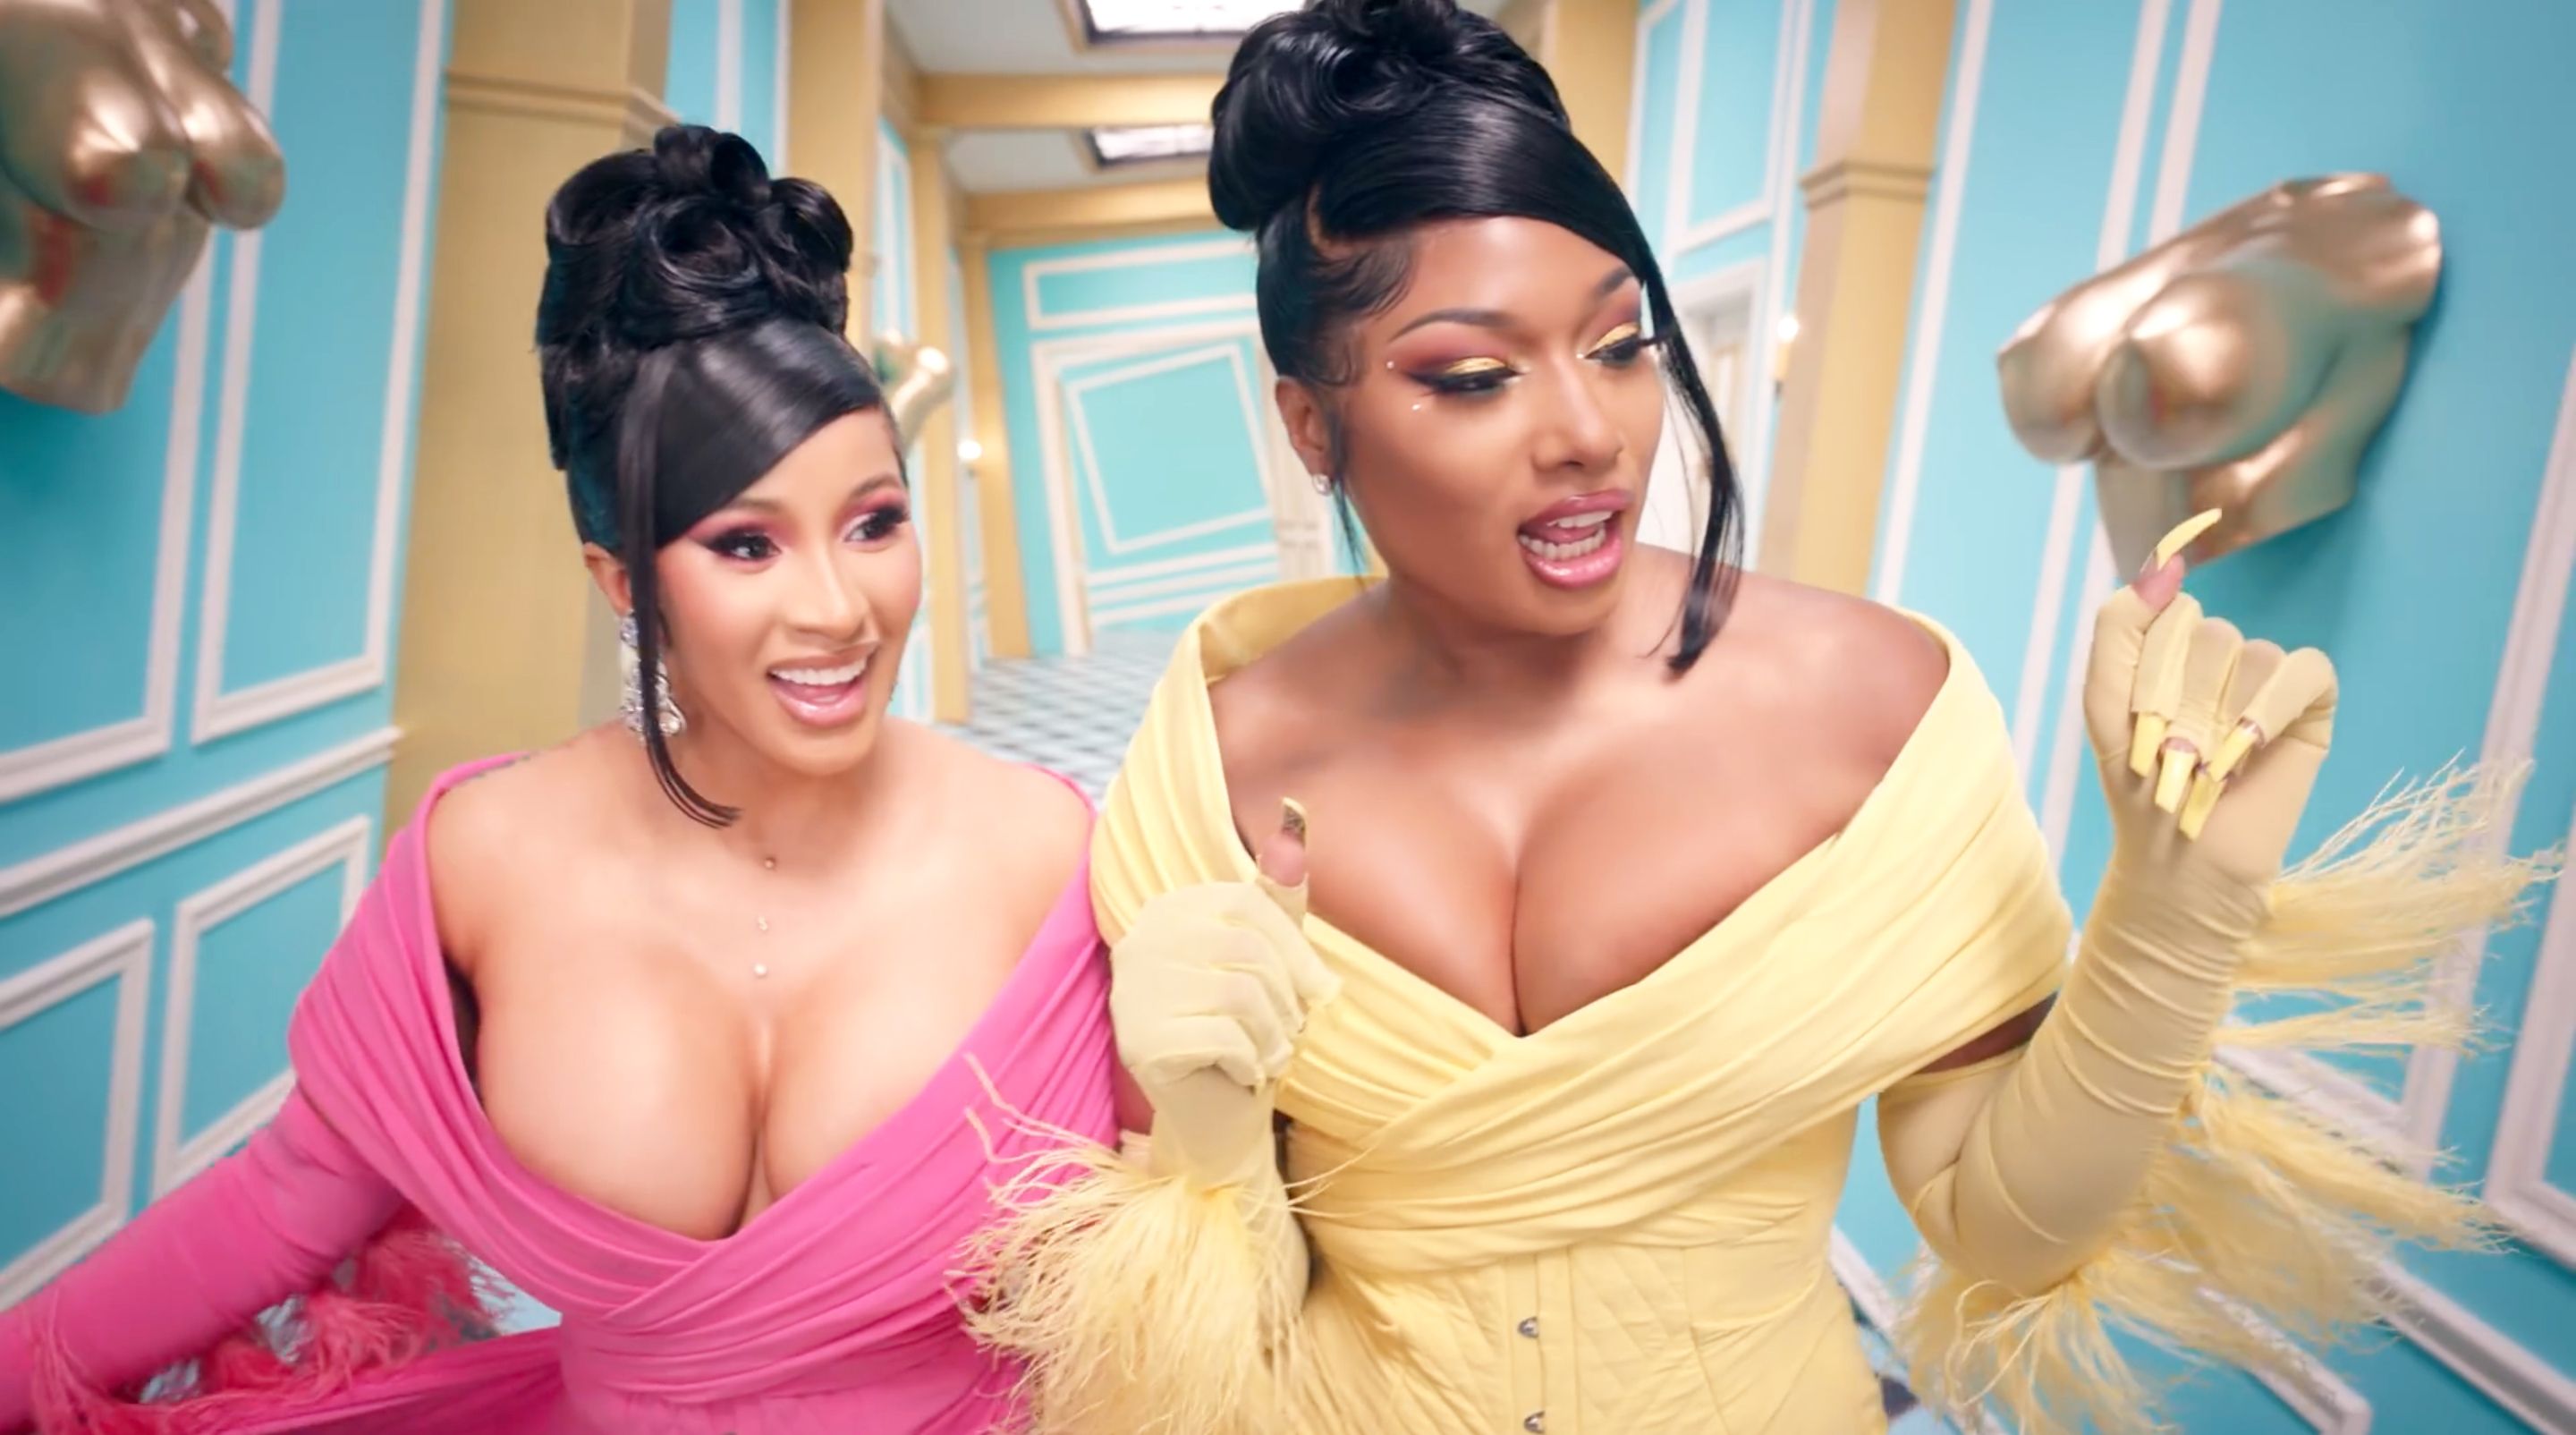 Cardi B and Megan Thee Stallion Release 'WAP' Behind-the-Scenes Video